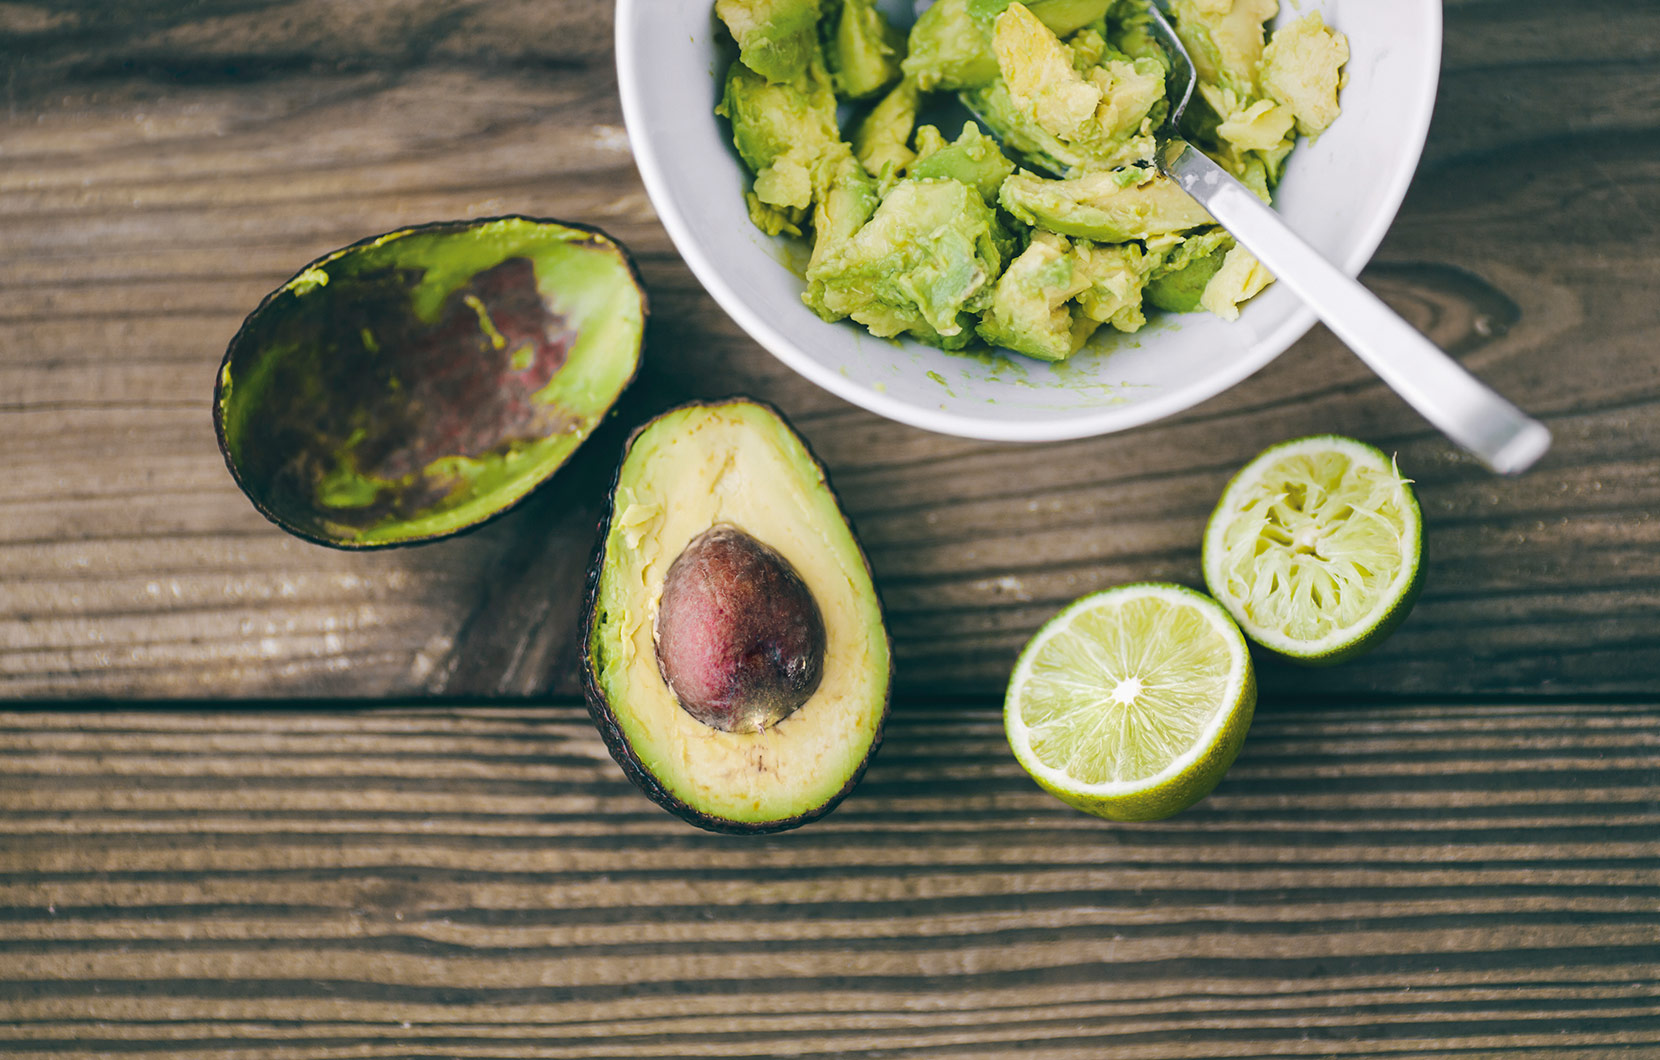 Take some Mexican flavors home with you by learning the art of the perfect guacamole.